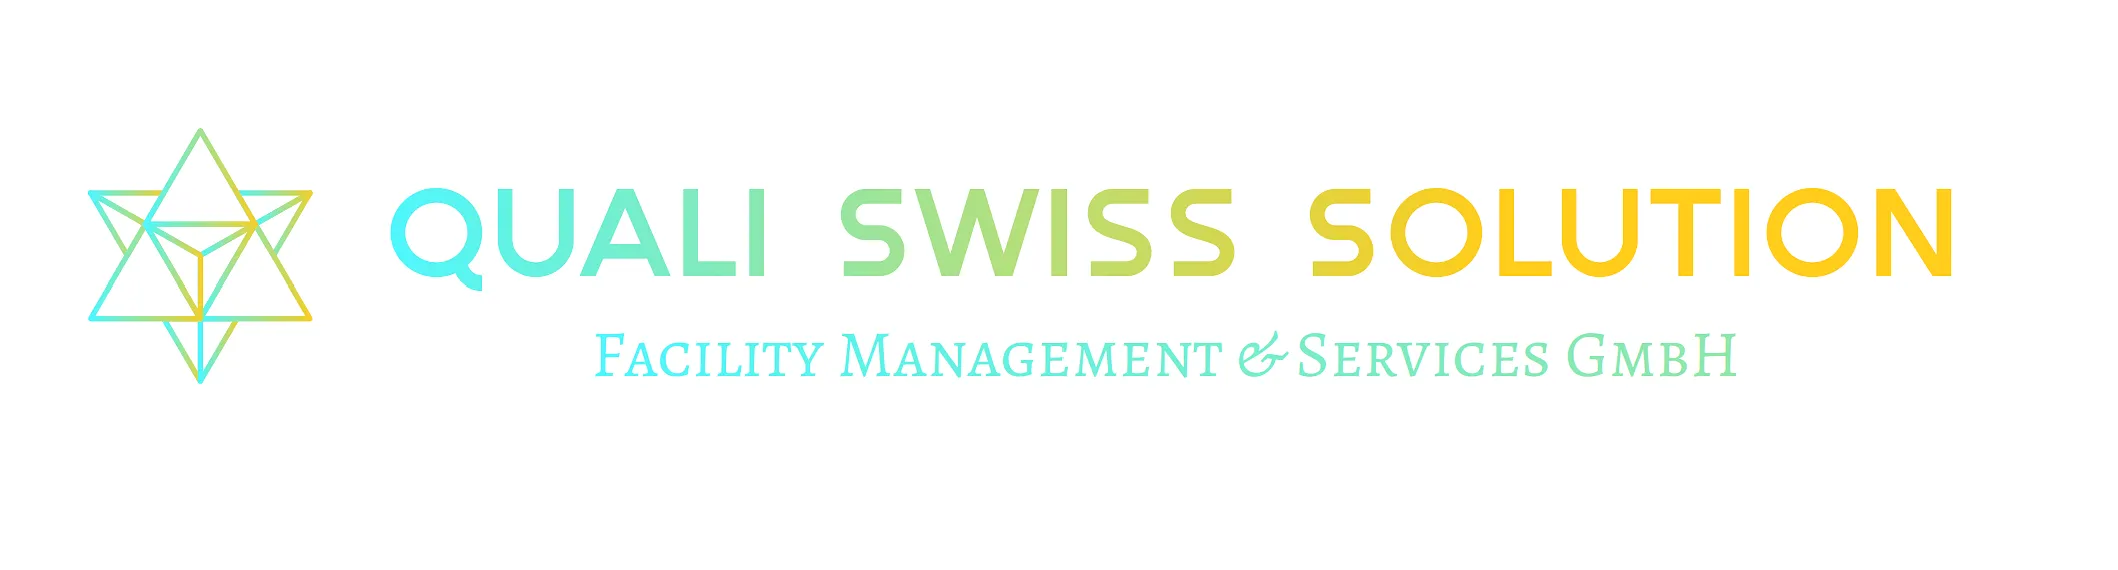 quali Swiss Solution Facility Management & Services GmbH